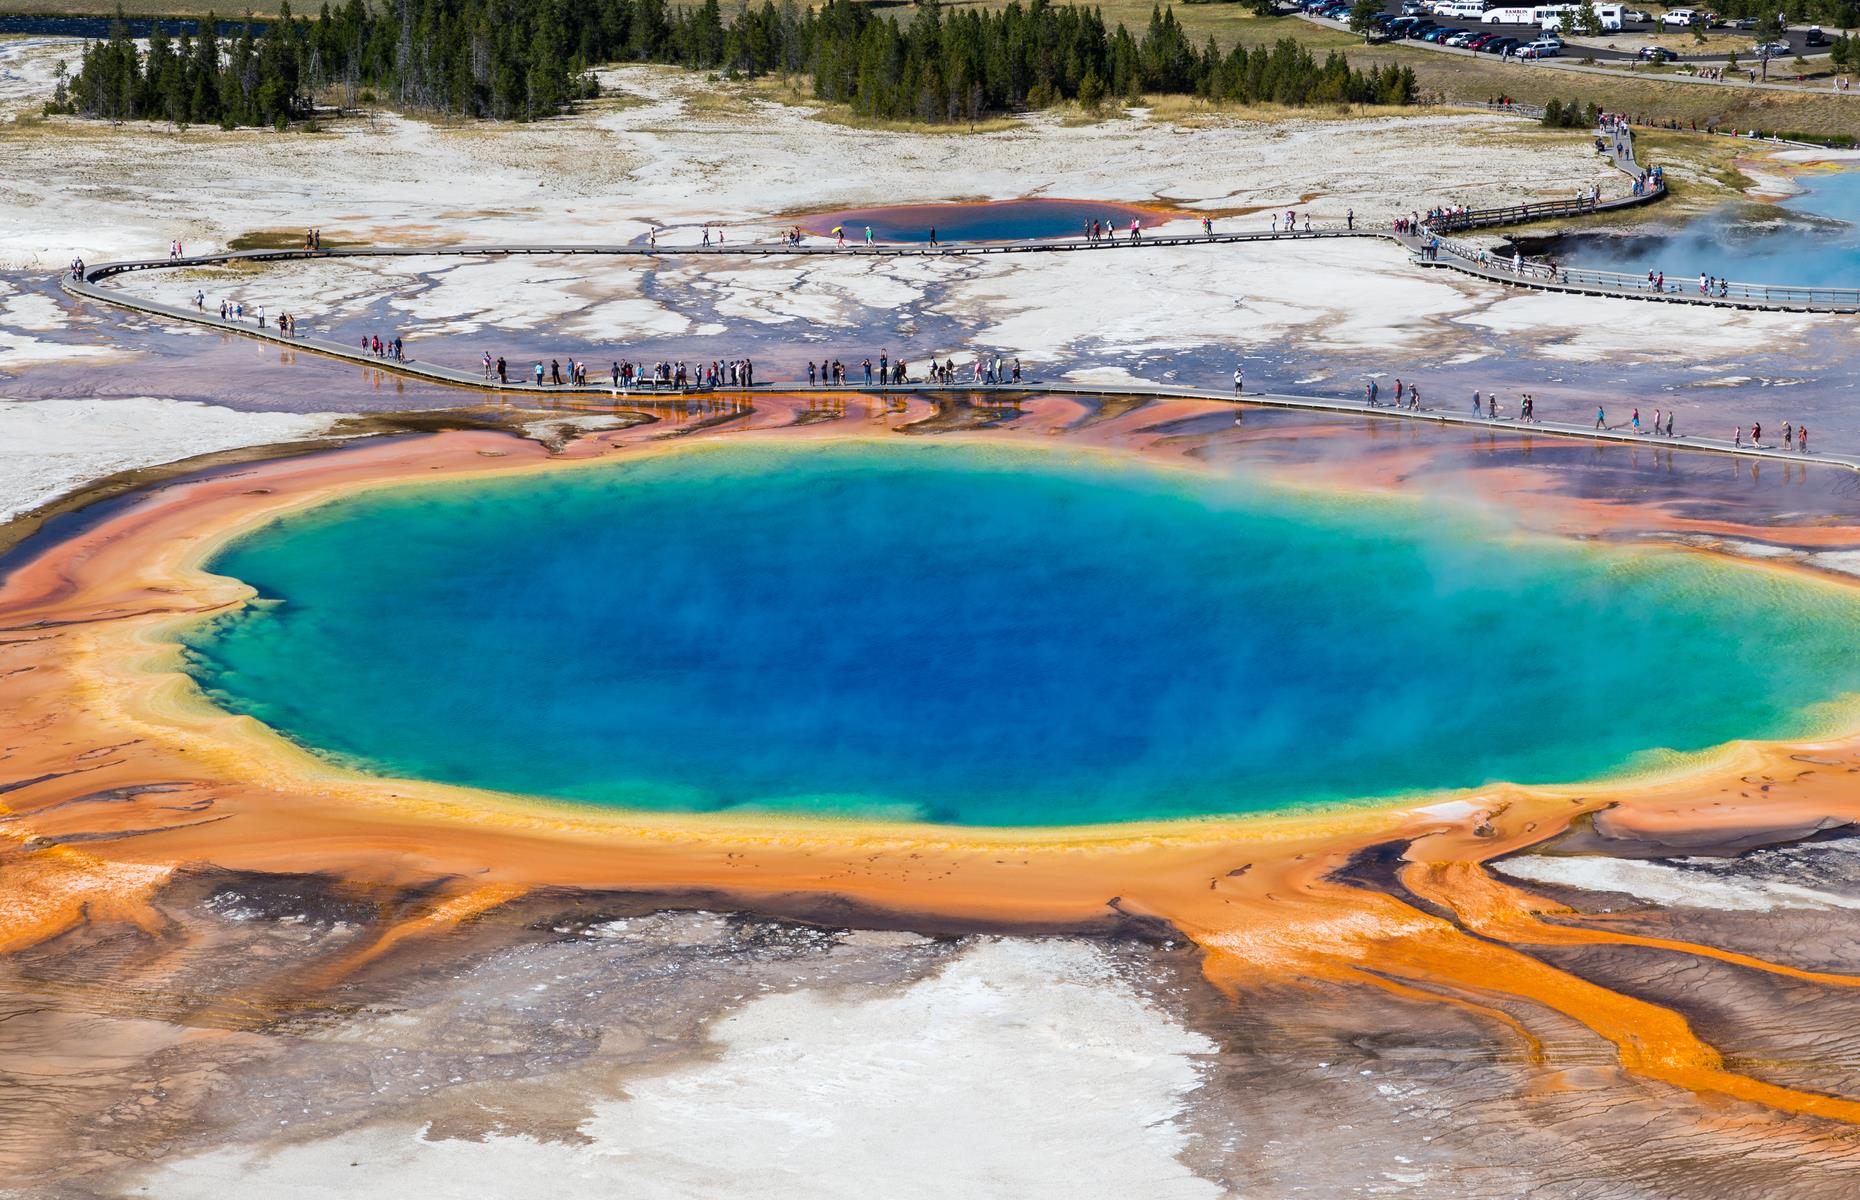 <p>With its vivid blue center, surrounded by bands of yellow, rusty orange and green, Grand Prismatic Spring in Yellowstone National Park looks almost otherworldly. The depths of this lake, filled with bubbling thermal waters, plunge as deep as 160 feet (49m). The psychedelic colors are caused by bacteria in the water. You can't bathe here, but head north to Mammoth to enjoy a soak in Boiling River. </p>